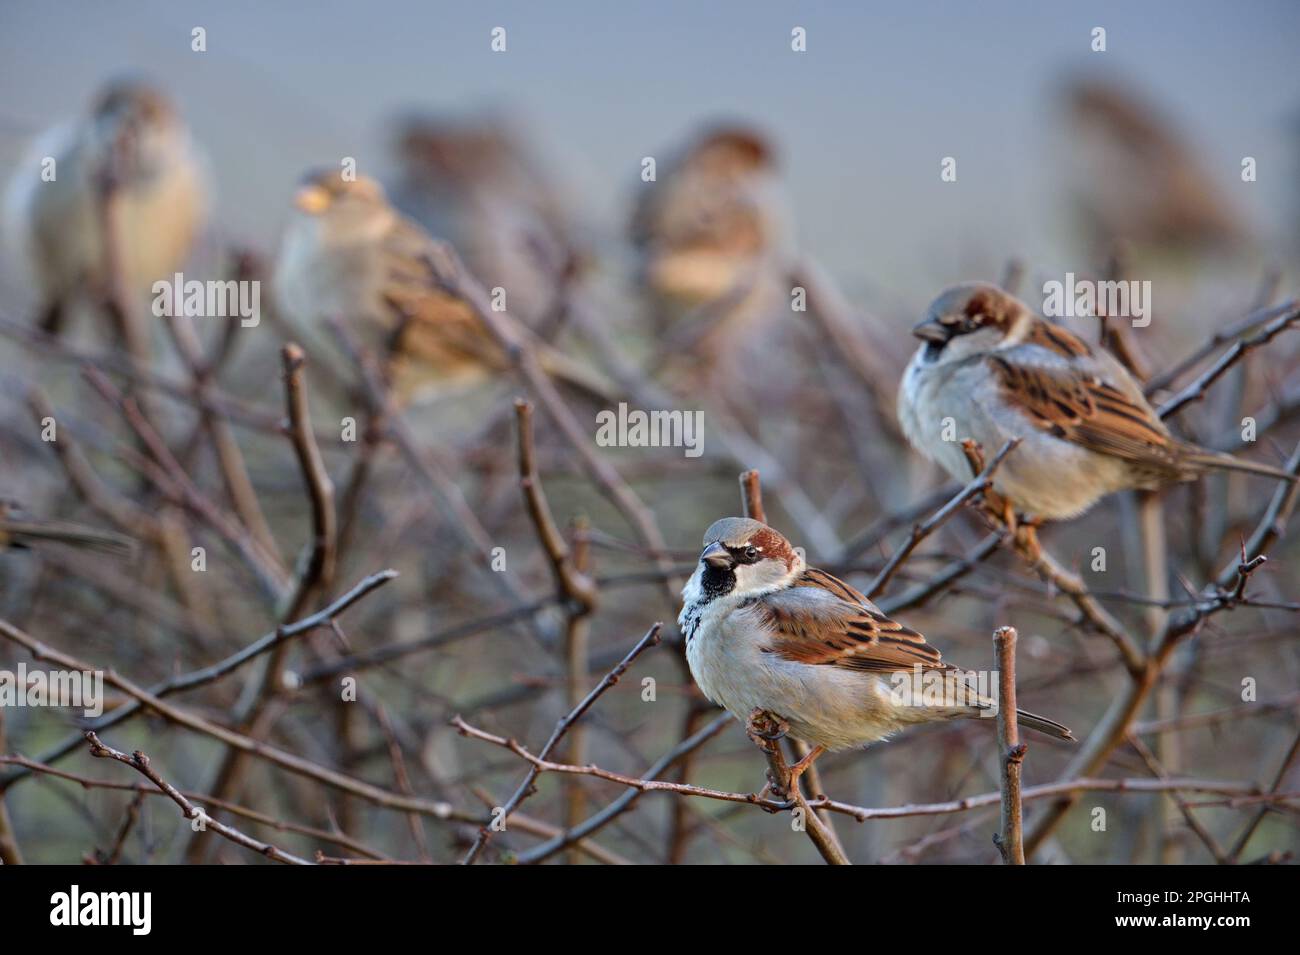 in neighbor's hedge... House sparrow, sparrows gathered on garden hedge. Stock Photo